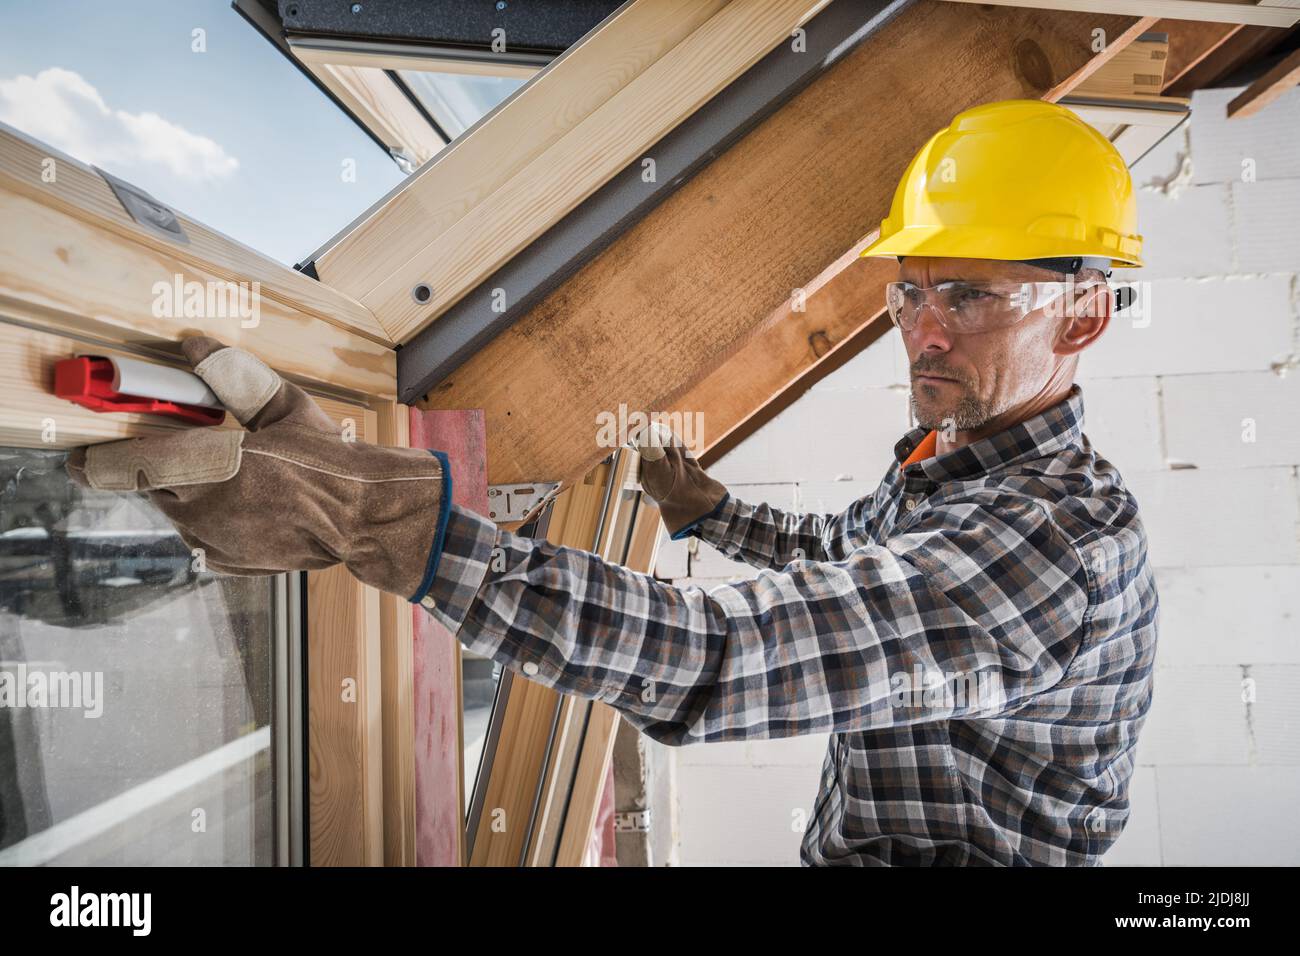 Professional Contractor Focused on His Work Testing the Functionality of Freshly Installed Roof Windows in a New Building Under Construction. Stock Photo